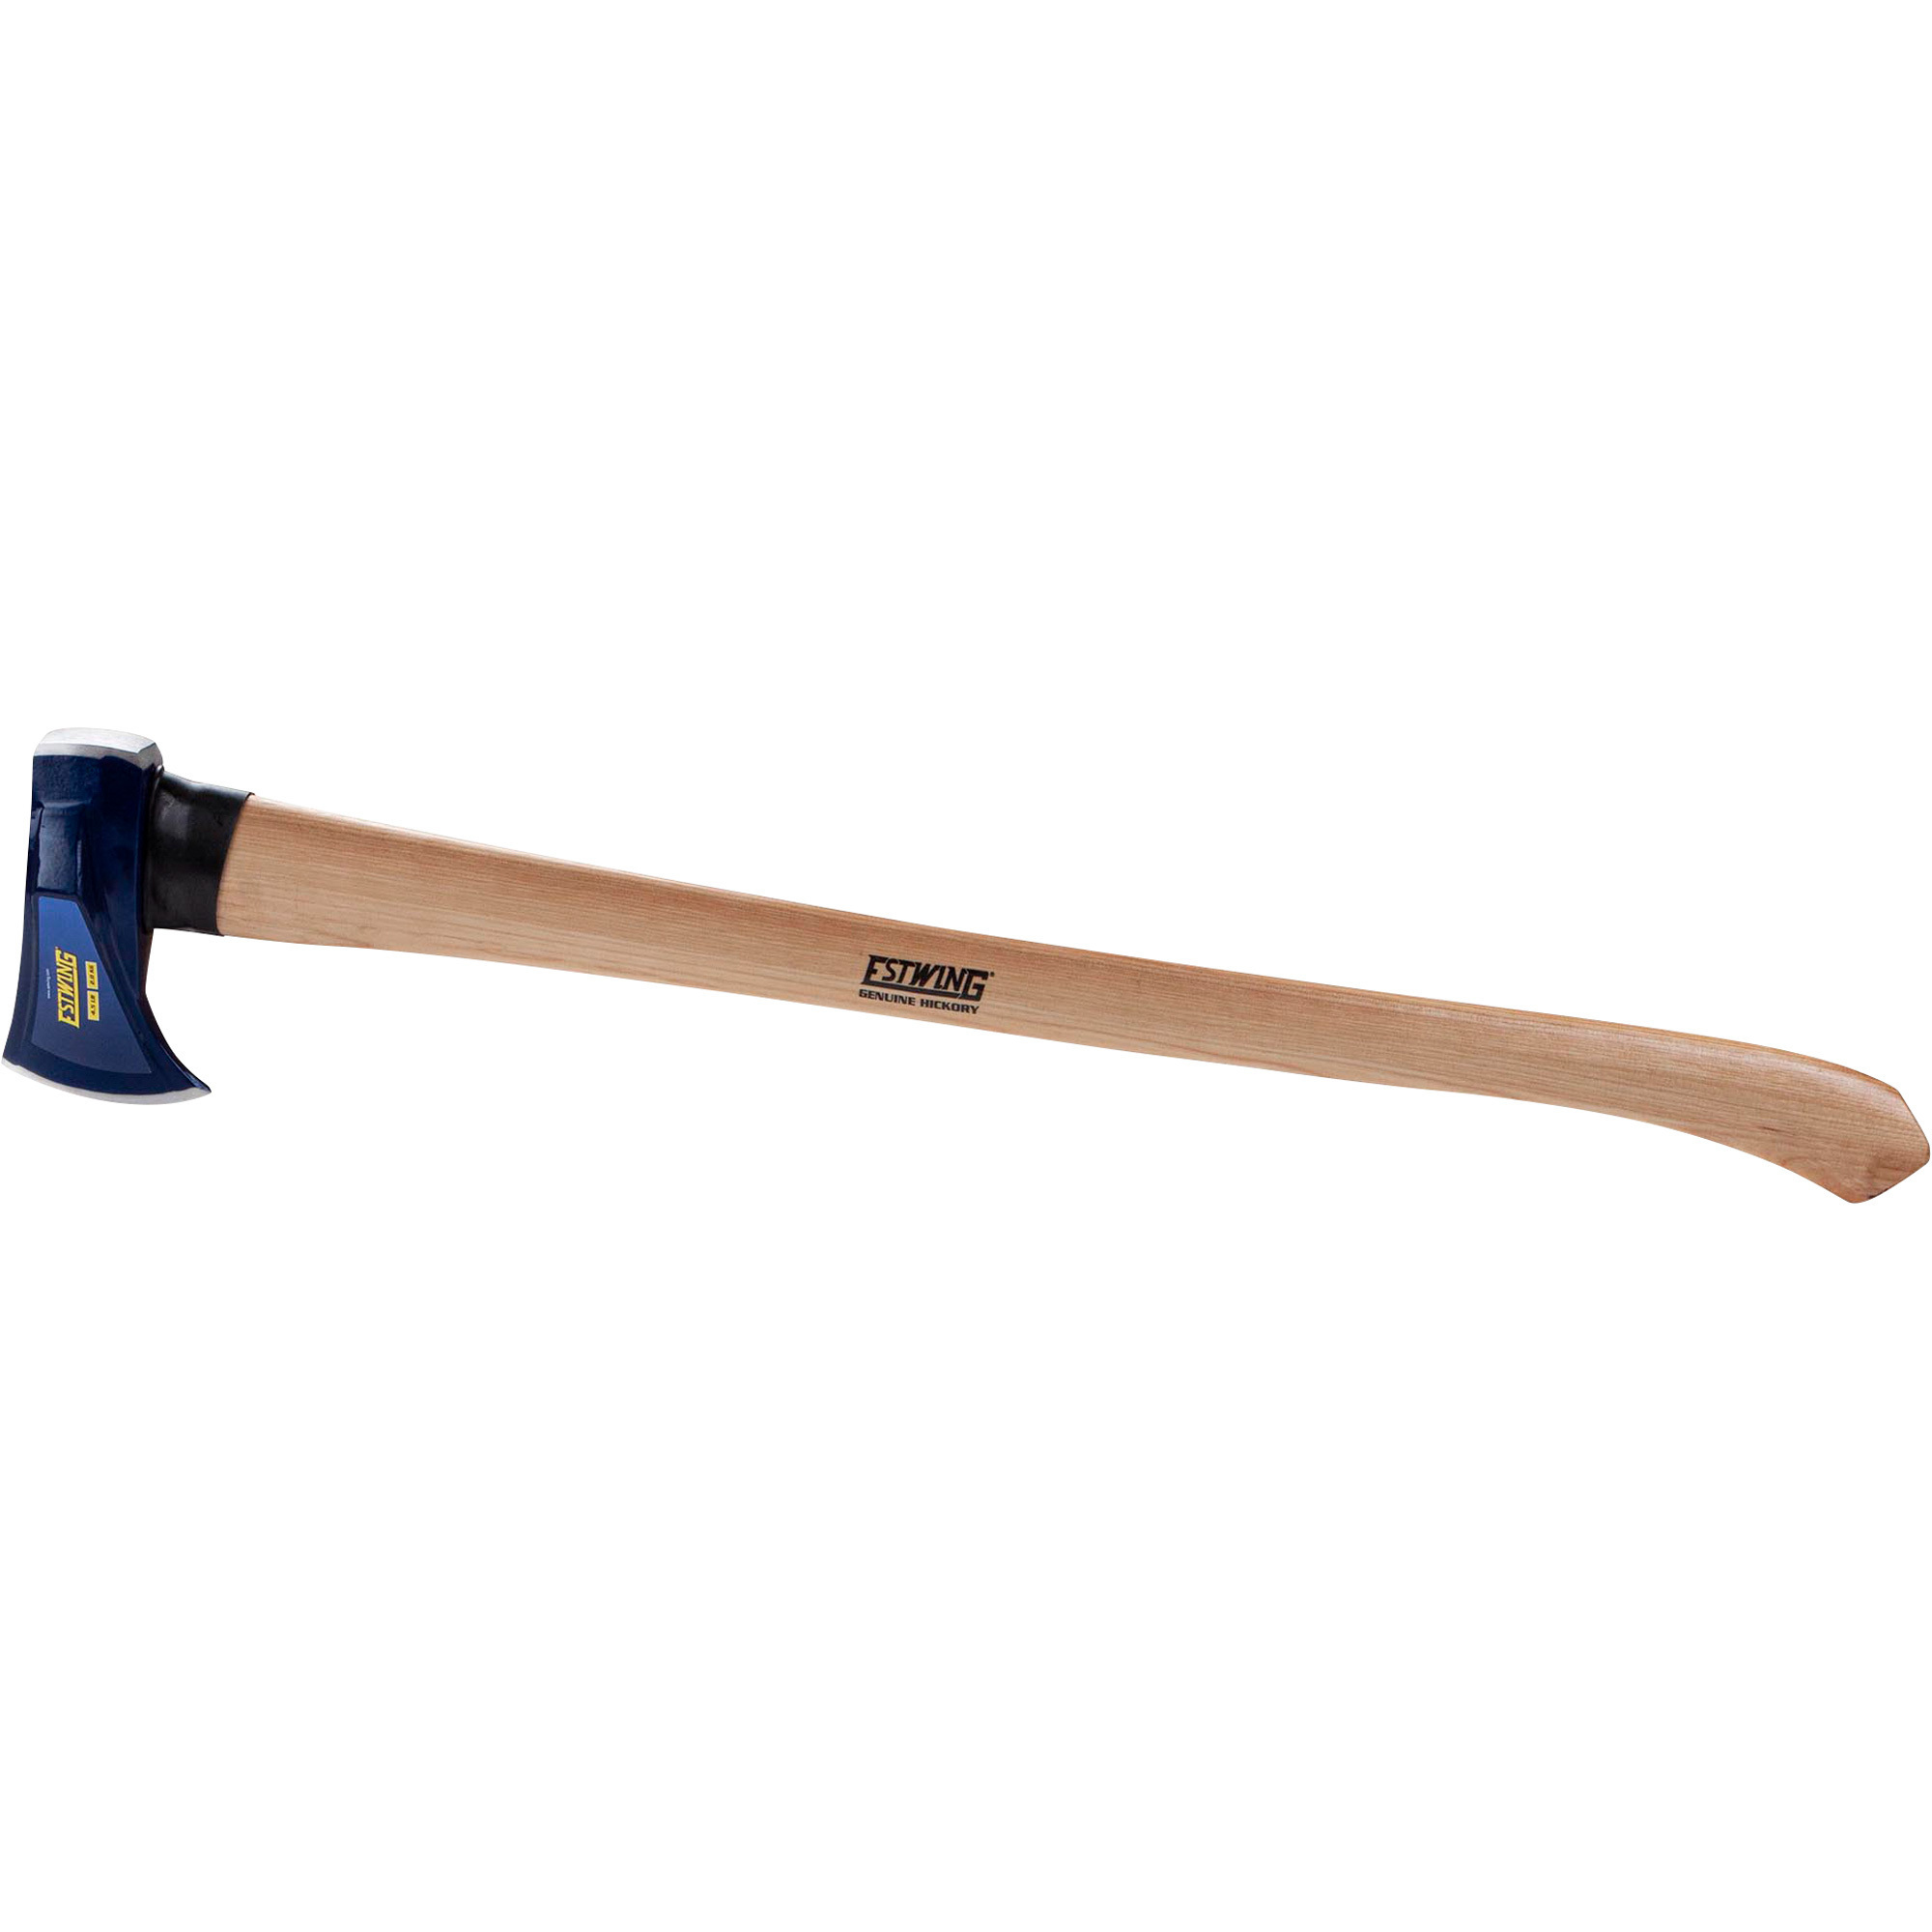 Estwing Splitting Maul with Hickory Wood Handle, 4.5-Lb., 36Inch, Model EML-436W